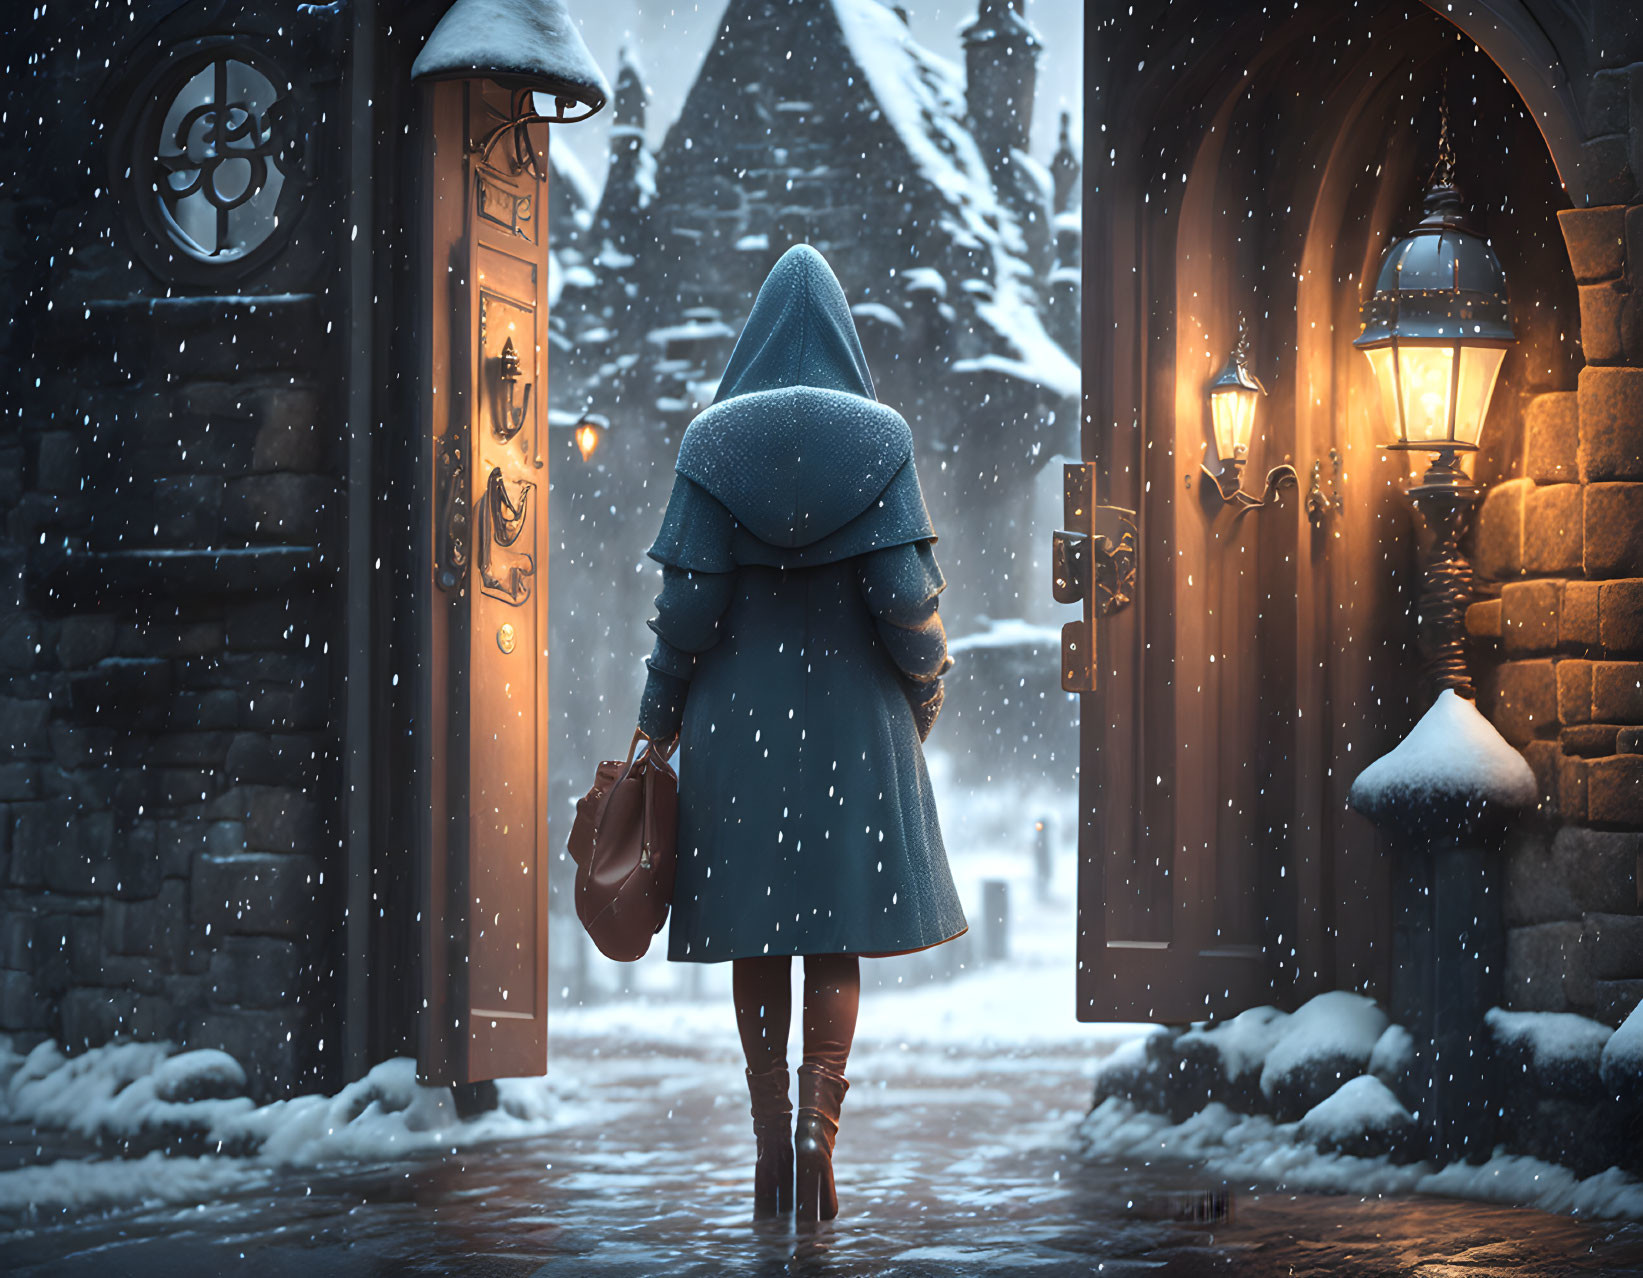 Person in Blue Coat Holding Bag in Snowy Scene with Lanterns and Doorway